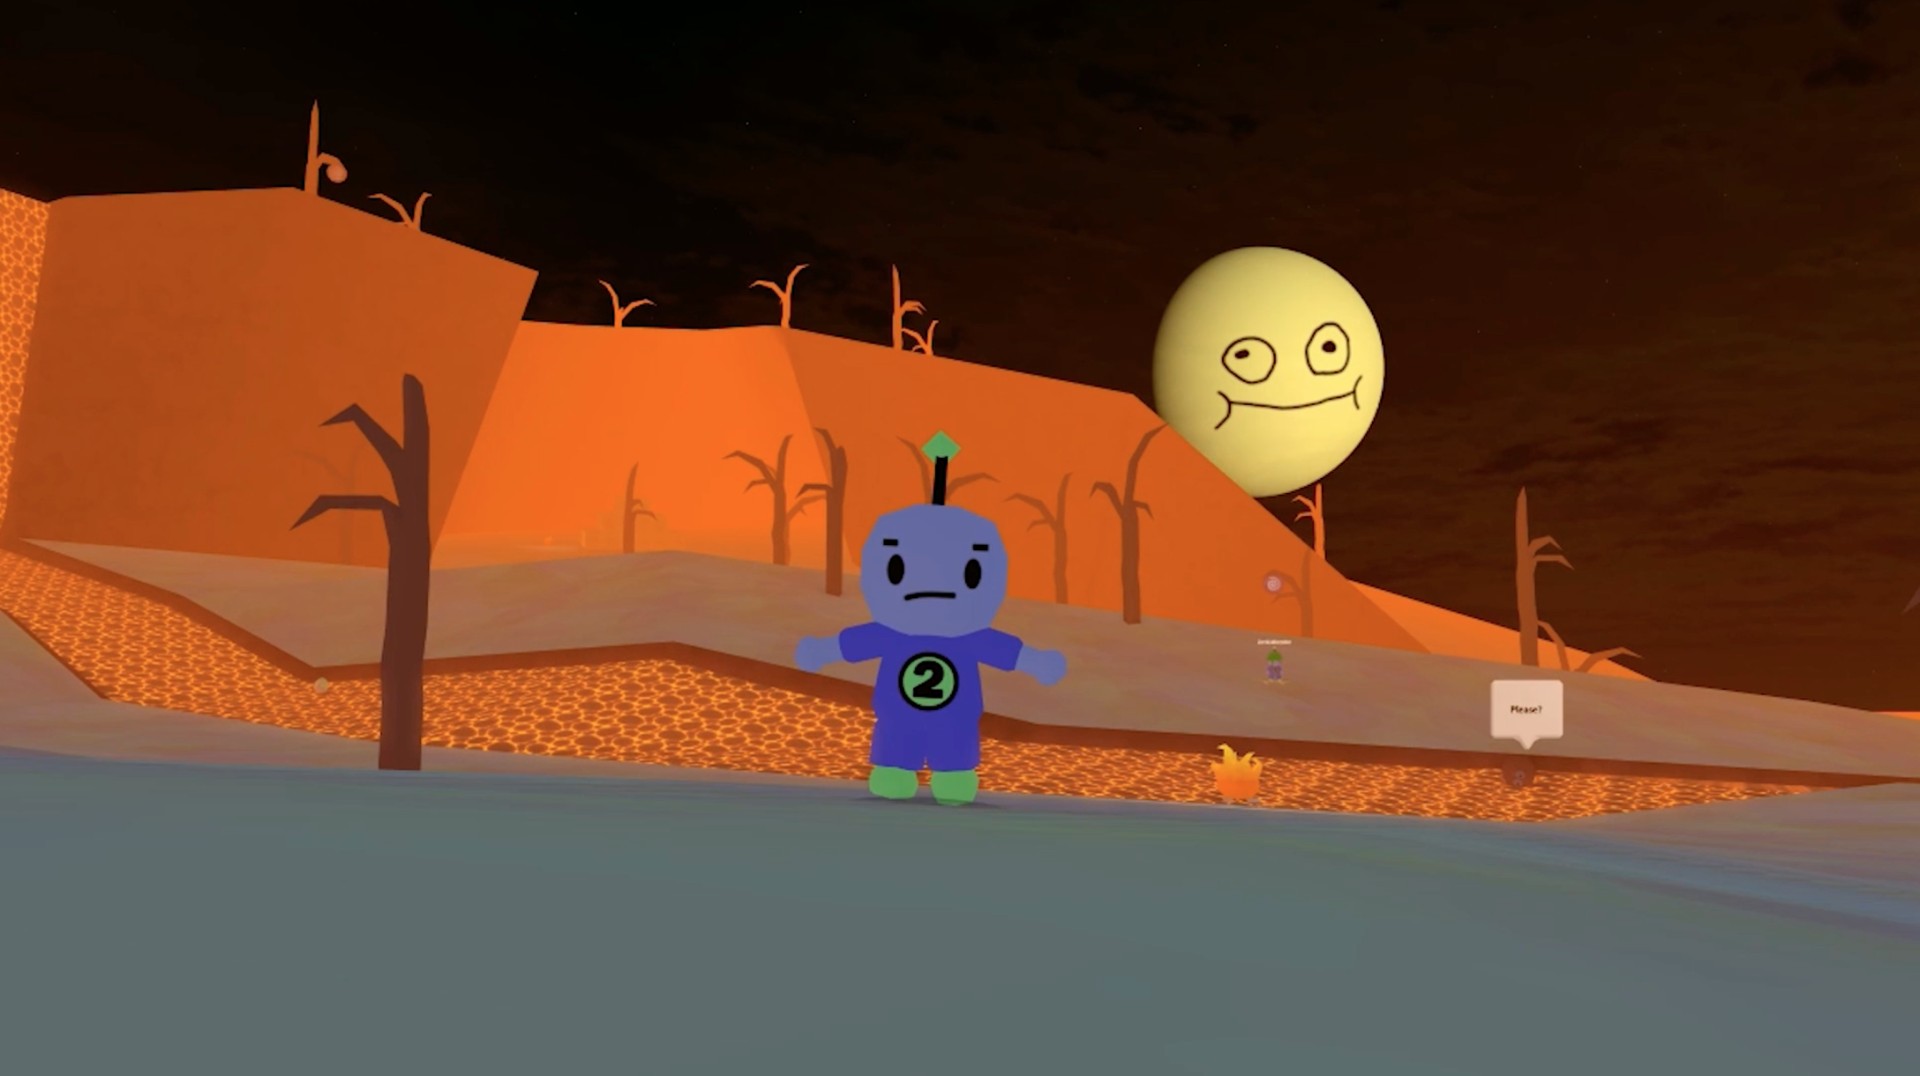 3d Platformer Robot 64 Is Now Available On Roblox For Xbox One Duncannagle Com - robot rival roblox